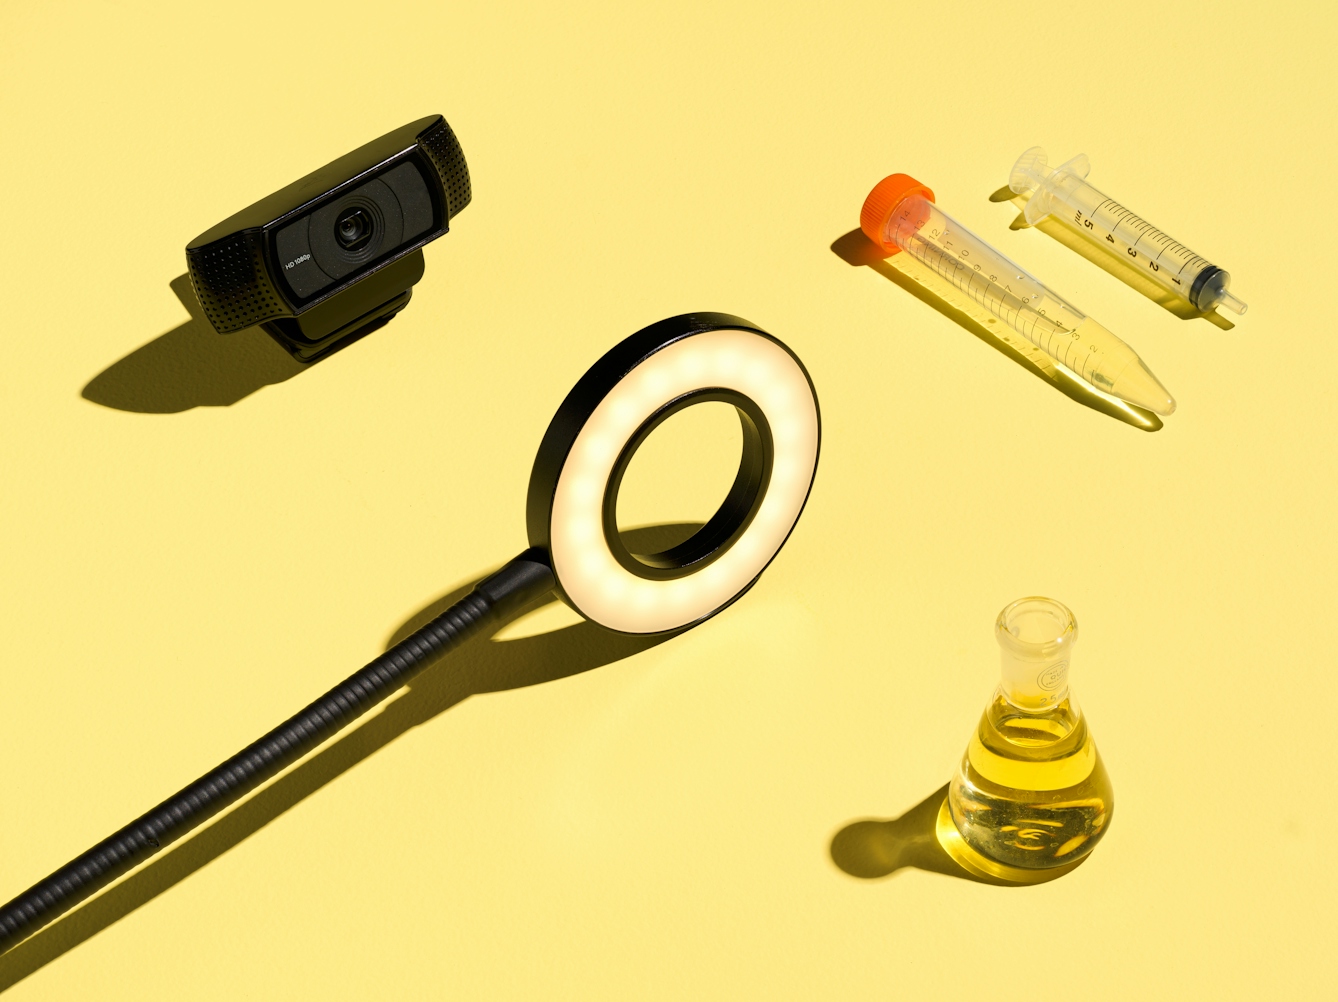 Photograph of 1 specimen bottle containing yellow liquid, 1 plastic specimen tube, 1 plastic syringe, a web cam ring light on a flexible arm and a web,. The whole scene has been photographed against a bright solid yellow background.